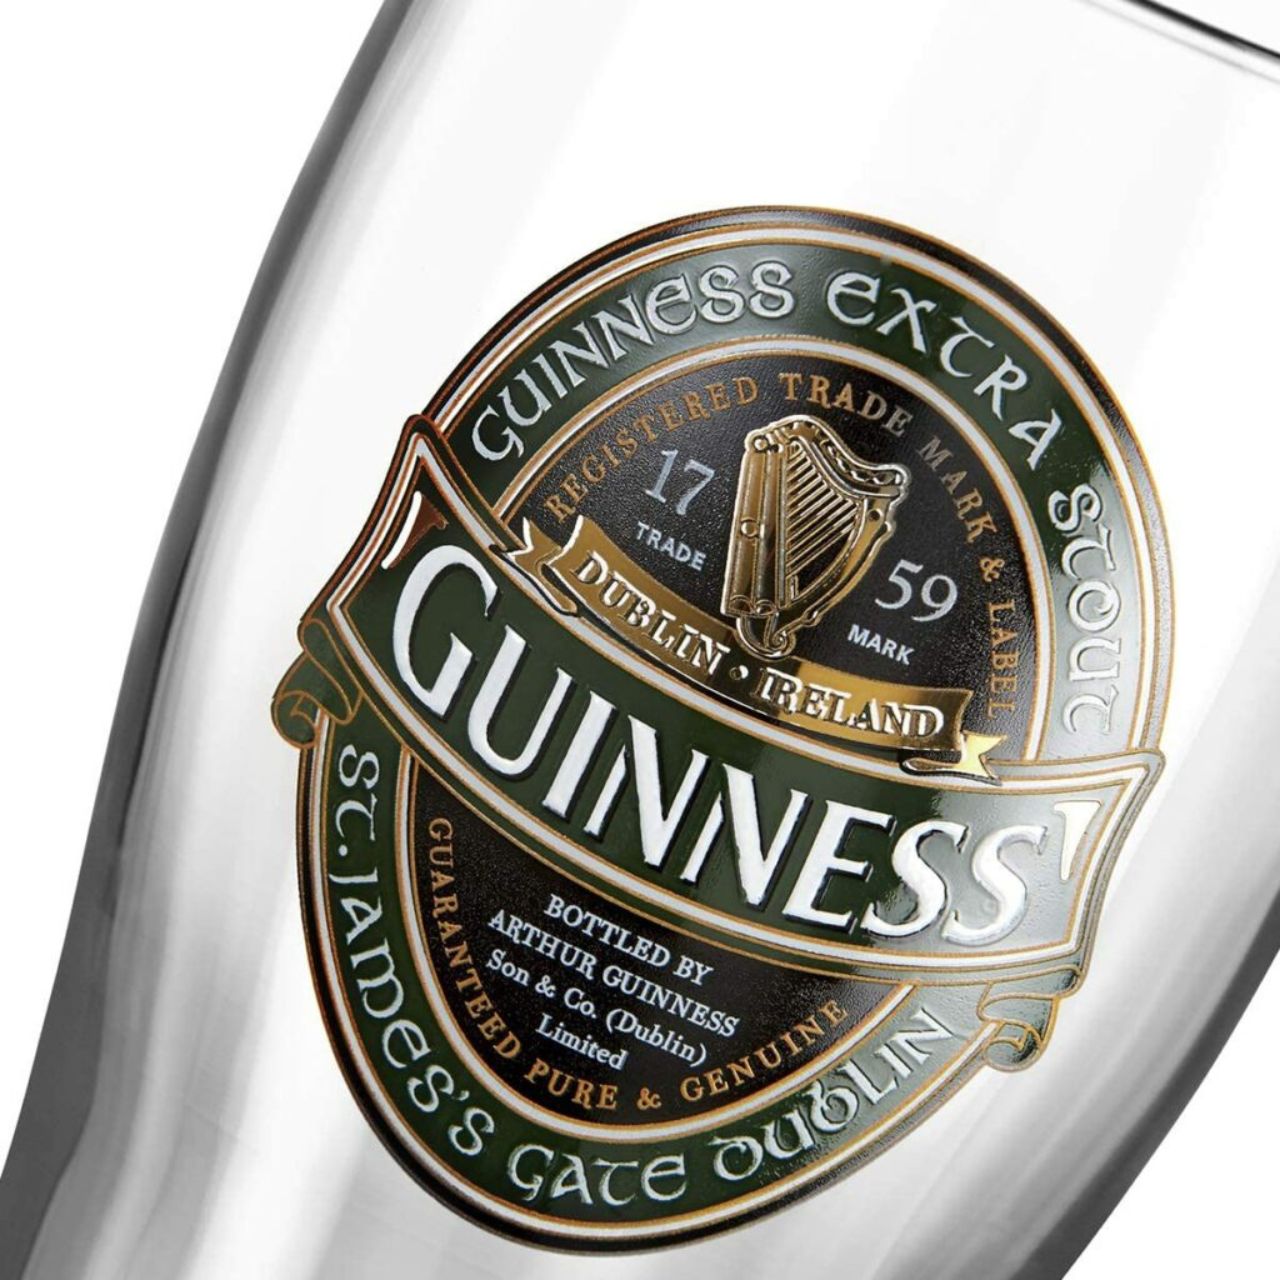 This label bears the signature Guinness logo name in white block letters, along with the signature gold Irish harp. Arthur Guinness made history on December 31st, 1759 when he signed an astounding 9,000-year lease for the St. James’s Gate Brewery in Dublin, Ireland, which is where Guinness beer is still crafted today.